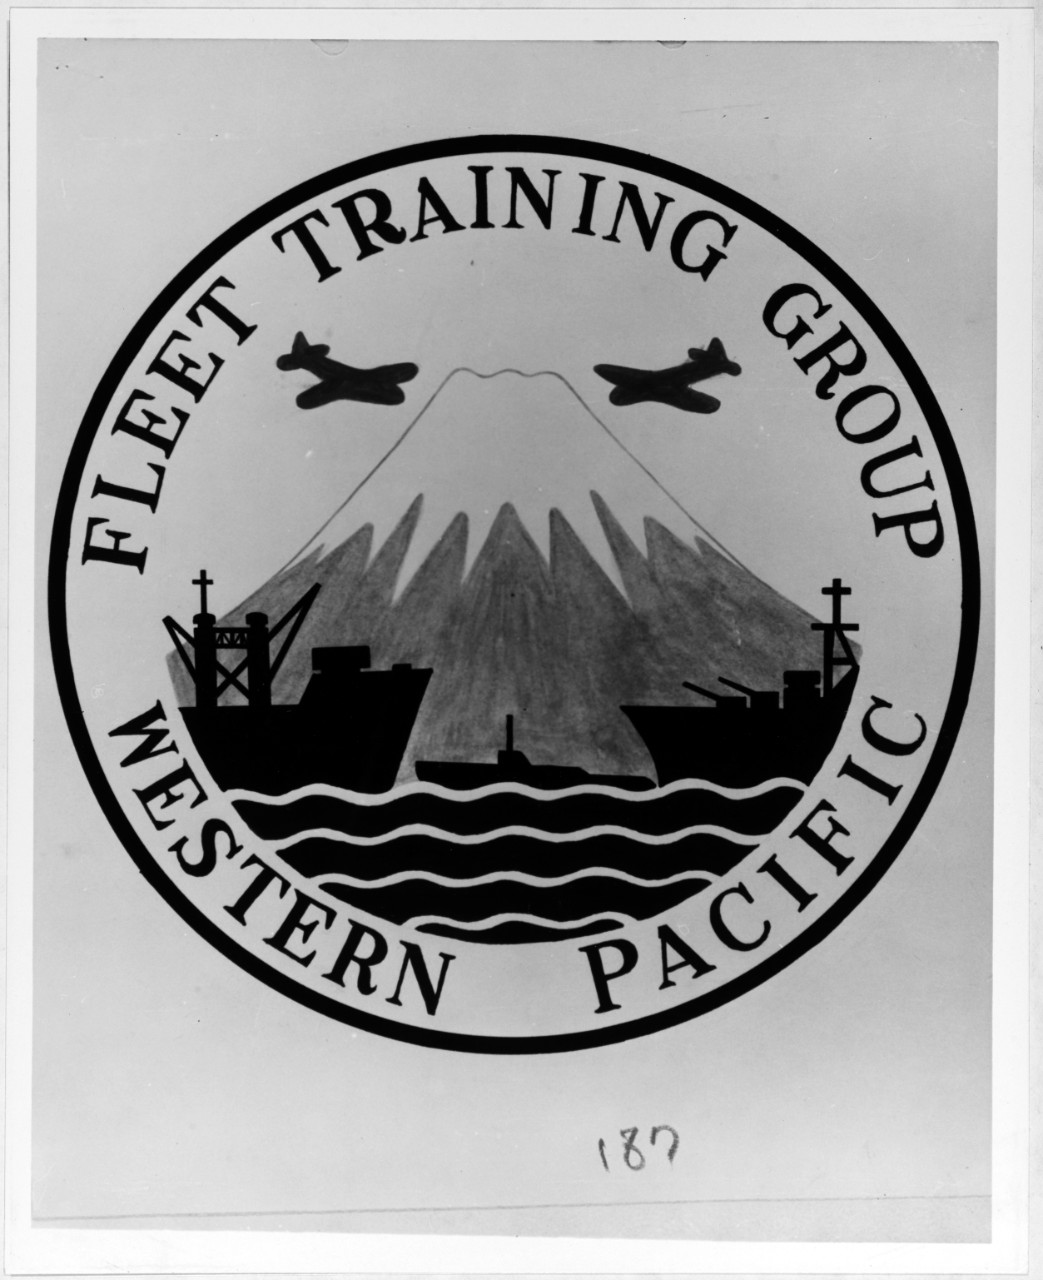 Insignia:  Fleet Training Group, West Pacific